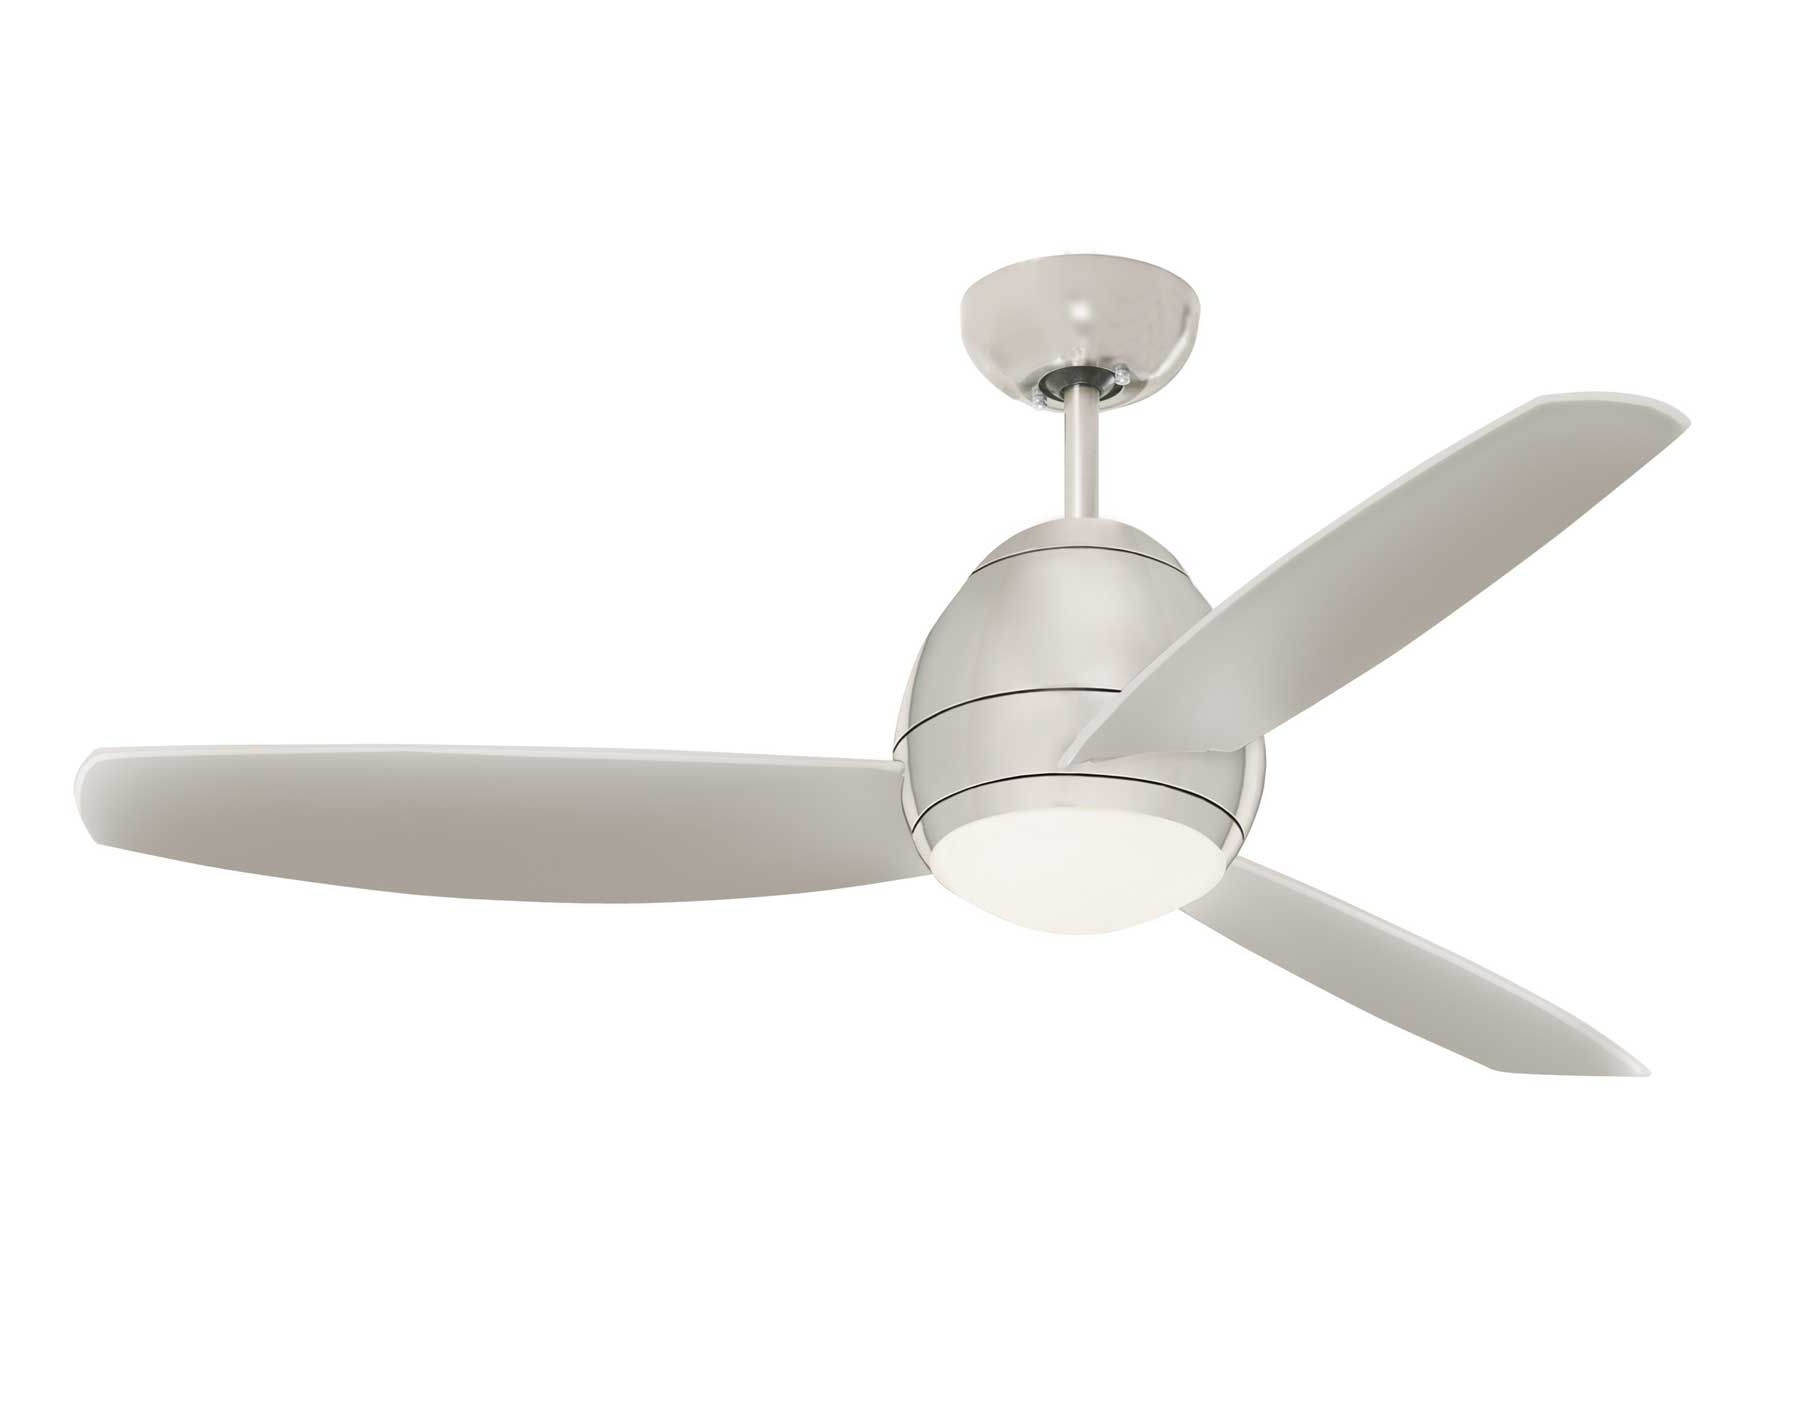 Favorite 24 Inch Outdoor Ceiling Fans With Light For Ceiling Fan: Remarkable 36 Outdoor Ceiling Fan For Home 36 Inch Fans (View 11 of 20)